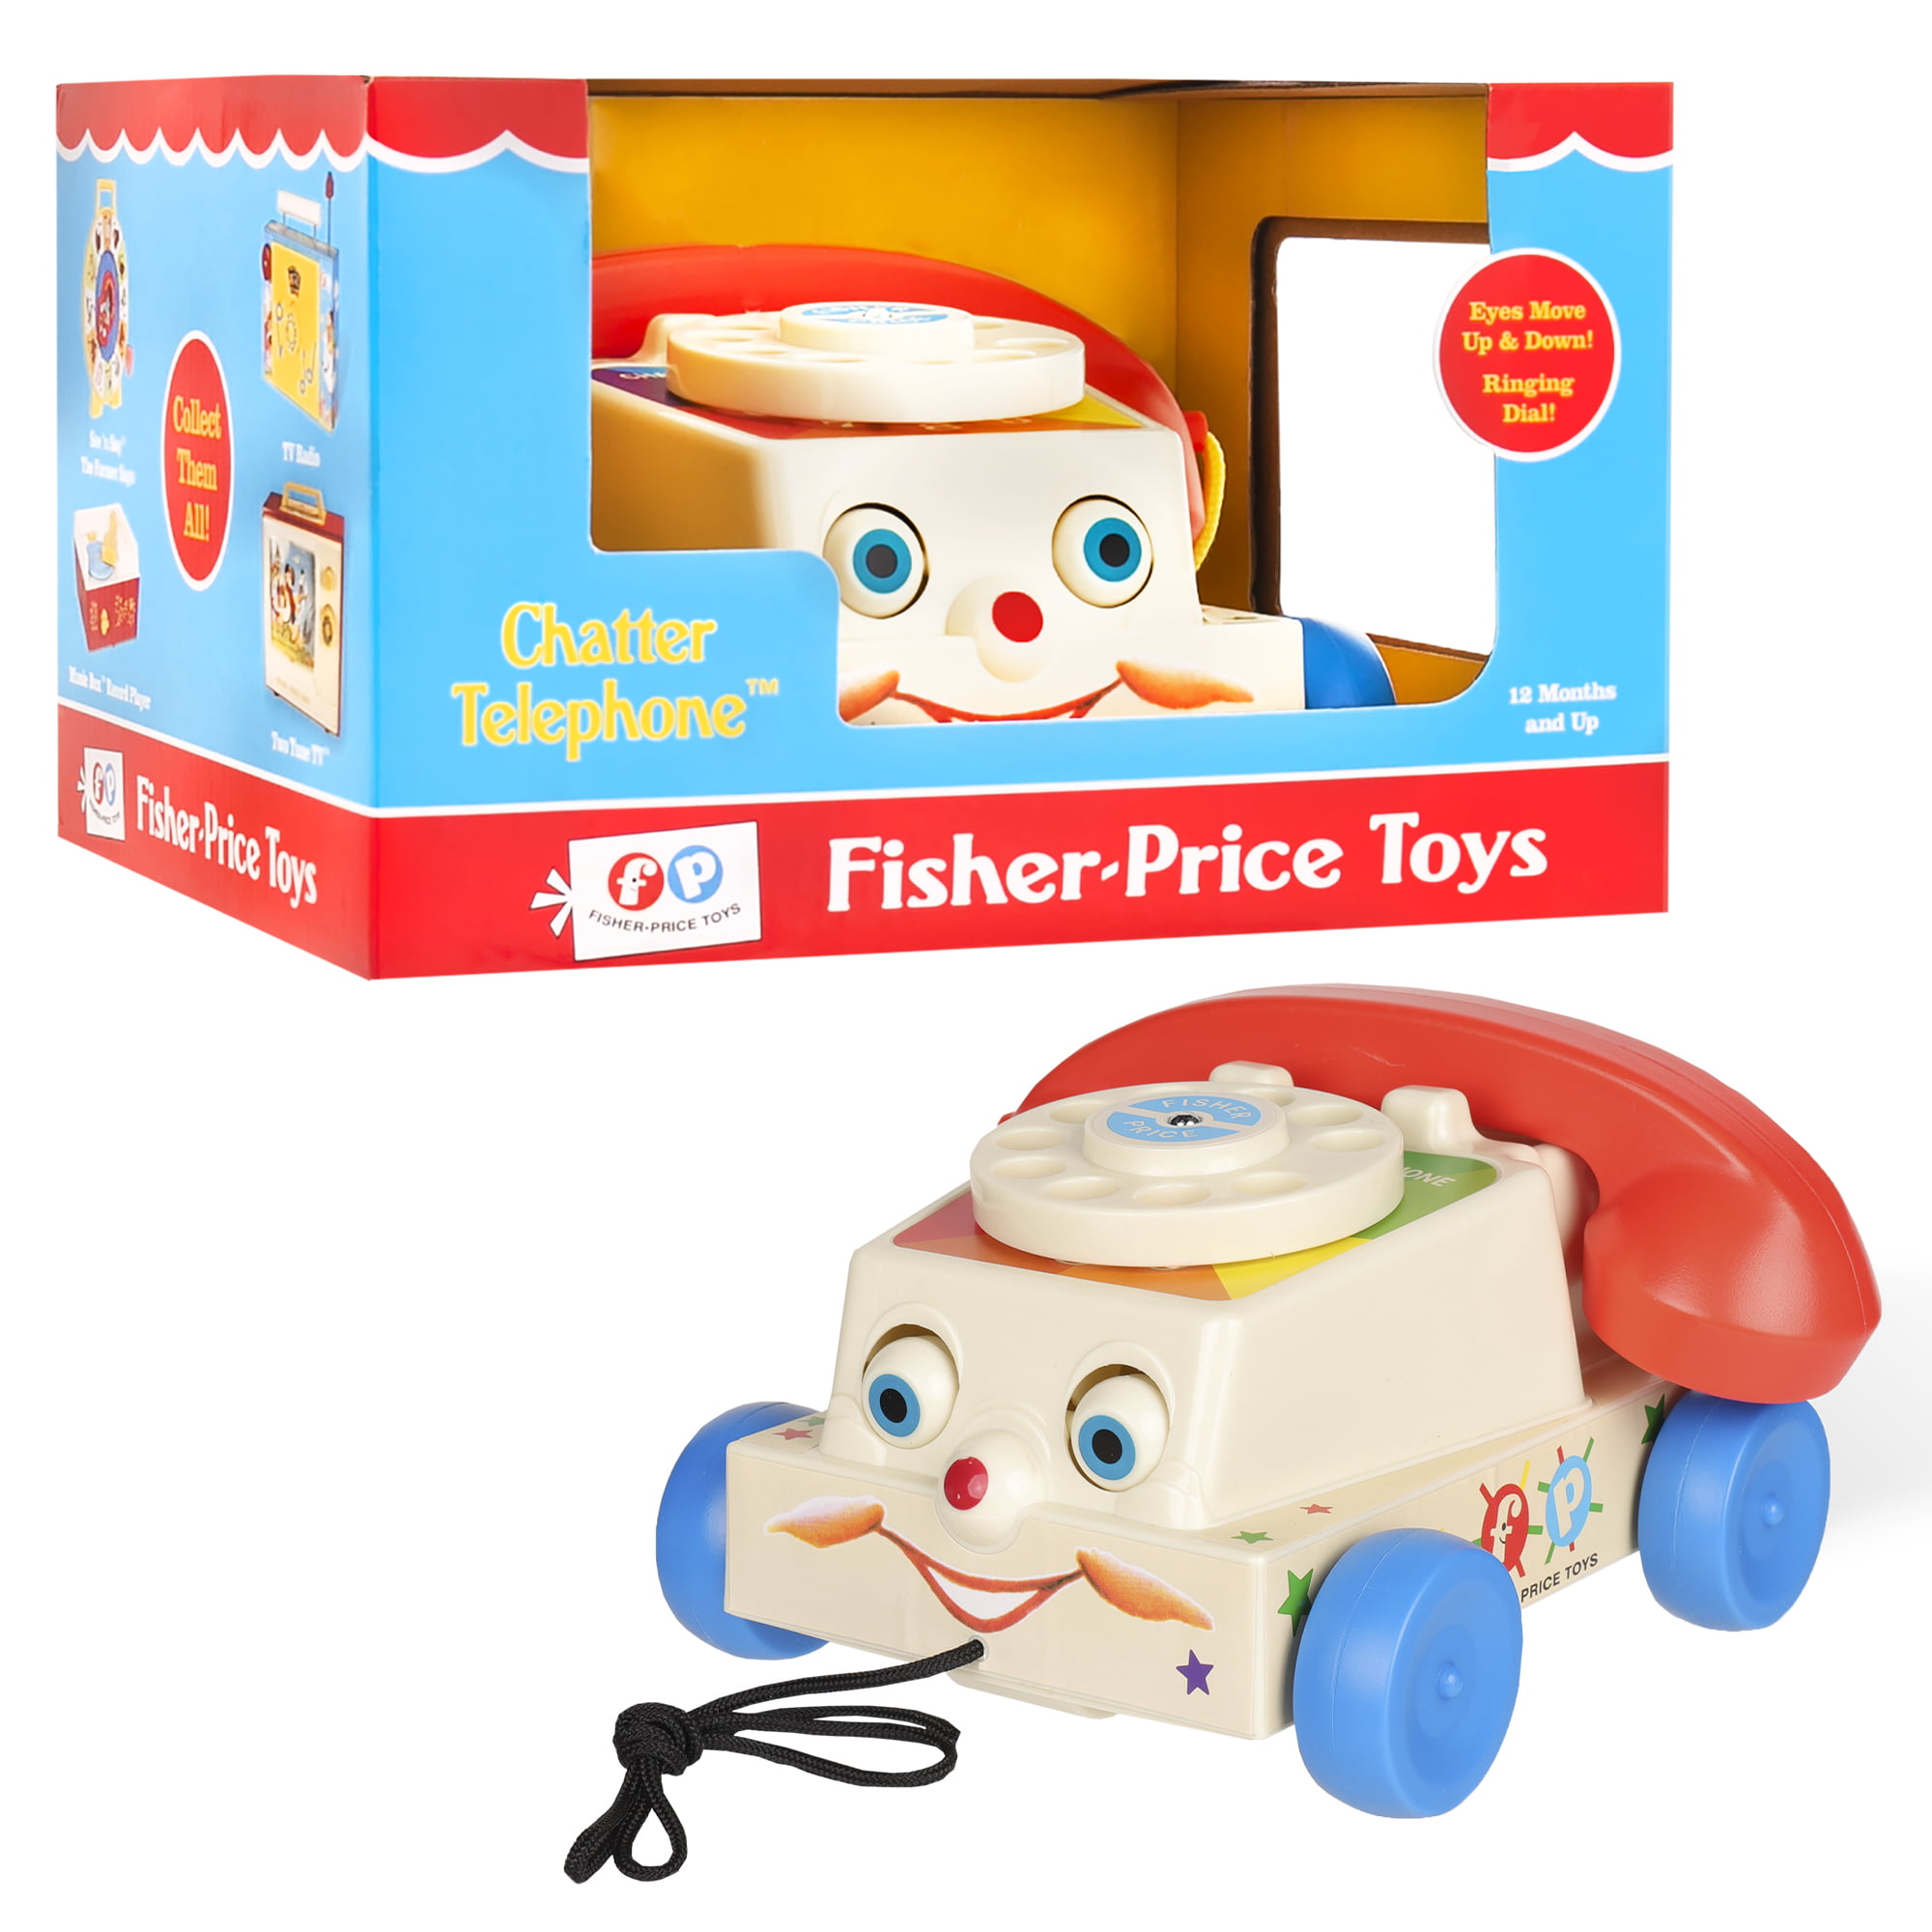 Toddler 12 Months + Chatter Telephone Toy Fisher Price Childrens Gift 